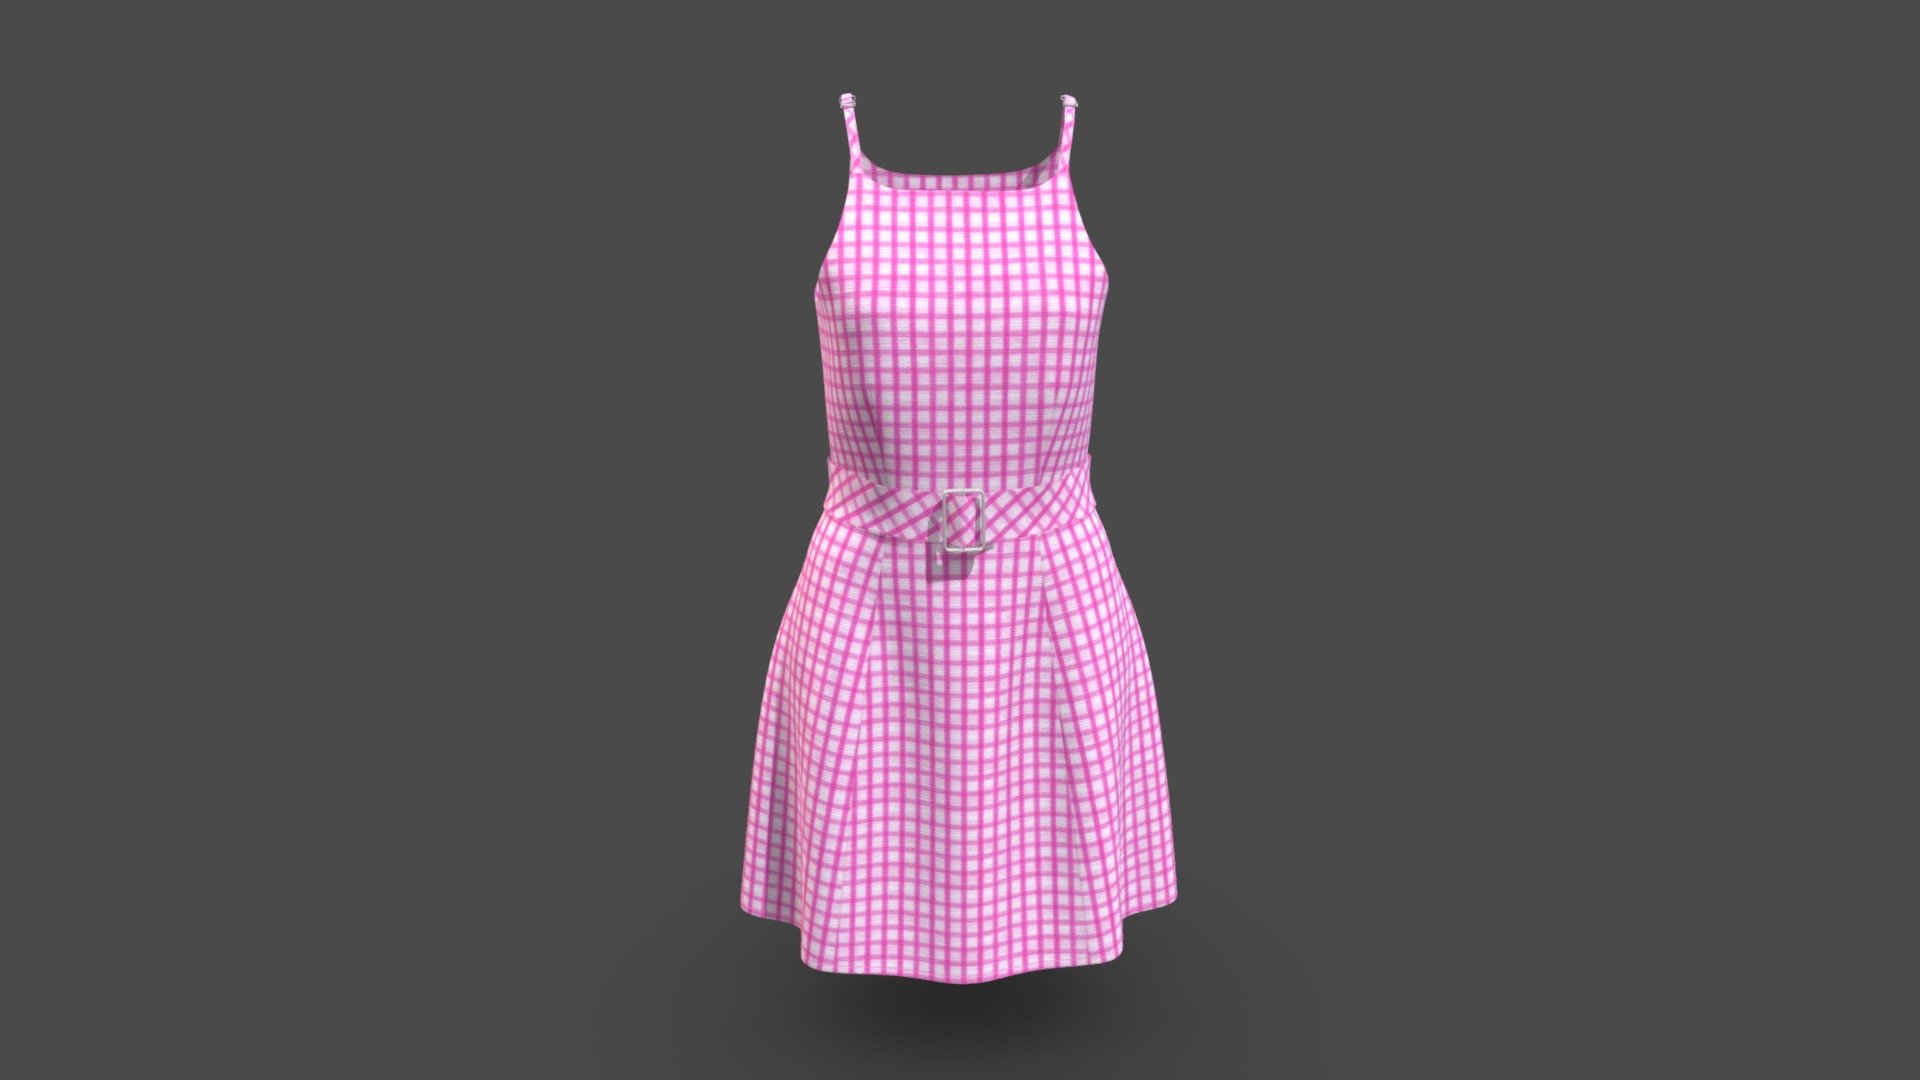 Women Woven Pink Check Barbie Dress
Version V1.0

Realistic high detailed Women Dress with high resolution textures. Model created by our unique processing &amp; Optimized for Web and AR / VR. 

SKU: 11531_3

Features

Optimized &amp; NON-Optimized obj model with 4K texture included




Optimized for AR/VR/MR

4K &amp; 2K fabric texture and details

Optimized model is 2.7MB

NON-Optimized model is 14.3MB

Unit measurement of obj is cm

Woven fabric &amp; print texture details included

GLB file in 2k texture size is 3.34MB

GLB file in 4k texture size is 11.9MB (Game &amp; Animation Ready)

Unit measurement of glb is meter

Suitable for web application configurator development.

Fully unwrap UV

The model has 1 material

Includes high detailed normal map

Unit measurement was inch

Triangular Mesh with 15k Vertices

Texture map: Base color, OcclusionRoughnessMetallic(ORM), Normal

For more details or custom order send email: hello@binarycloth.com


Website:binarycloth.com - Women Woven Pink Check Barbie Dress - Buy Royalty Free 3D model by BINARYCLOTH (@binaryclothofficial) 3d model